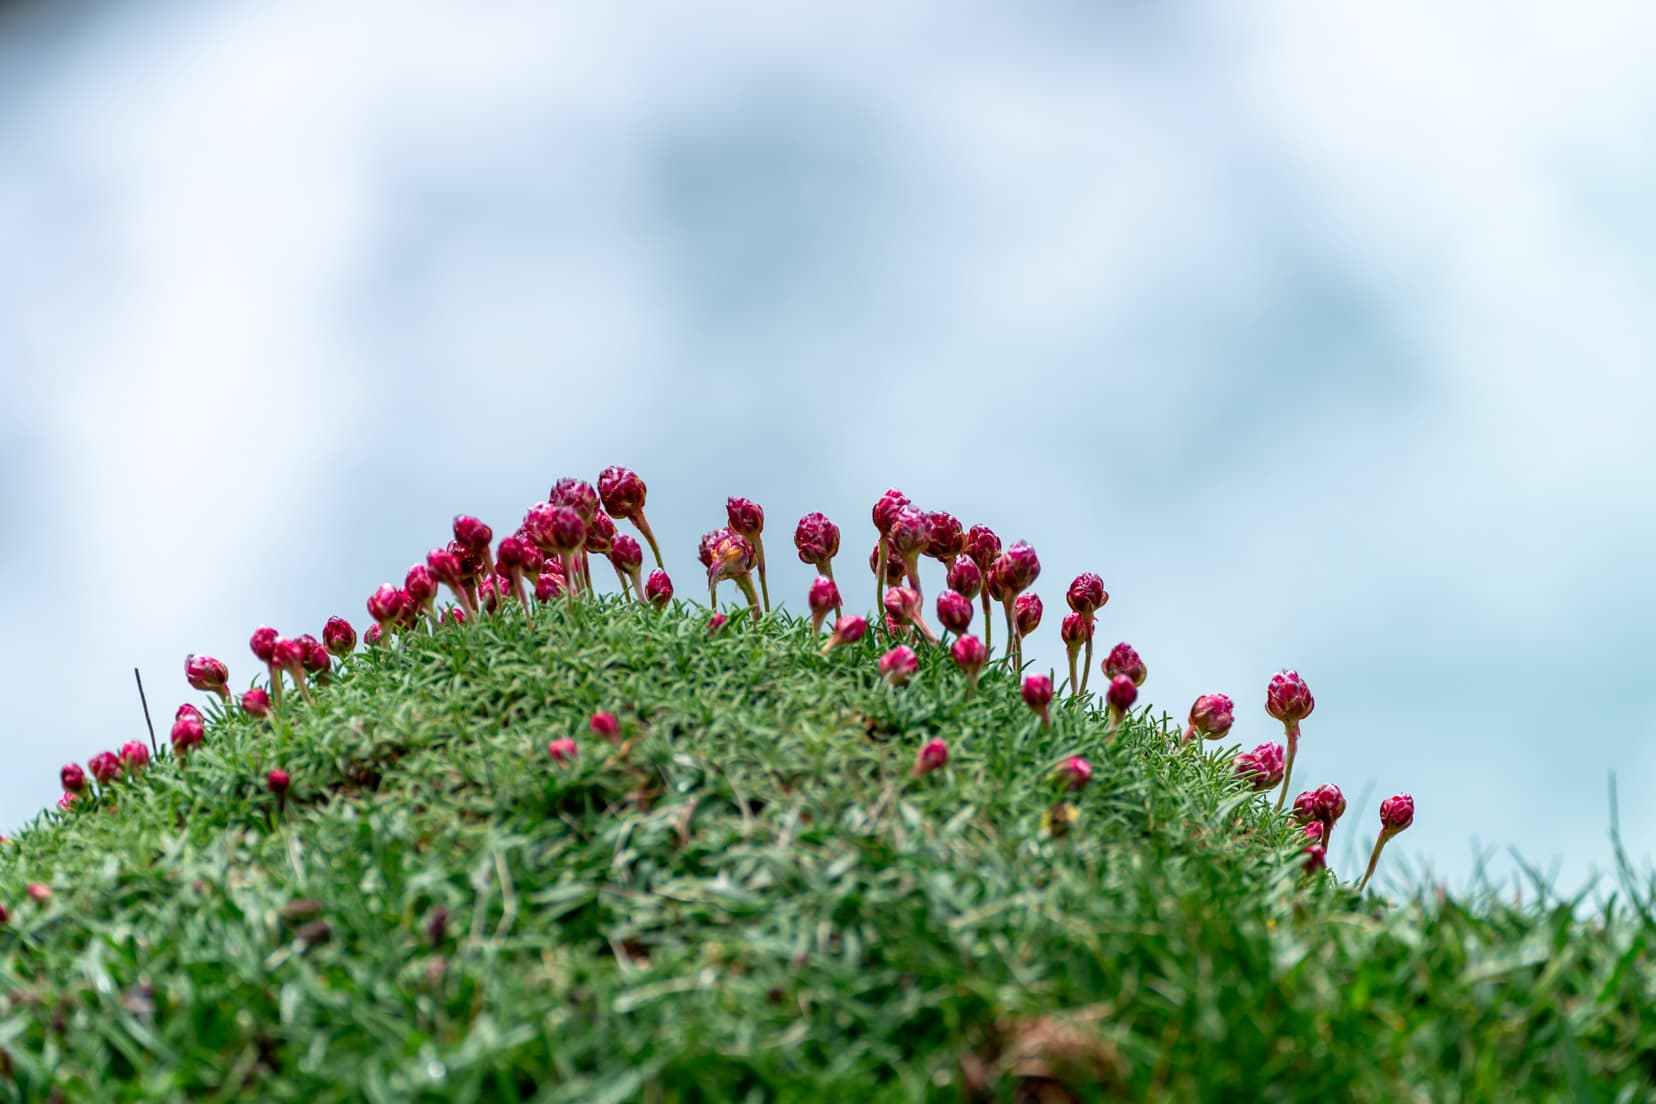 a small mound of pink thrift - little pink ball like shape on a short stem